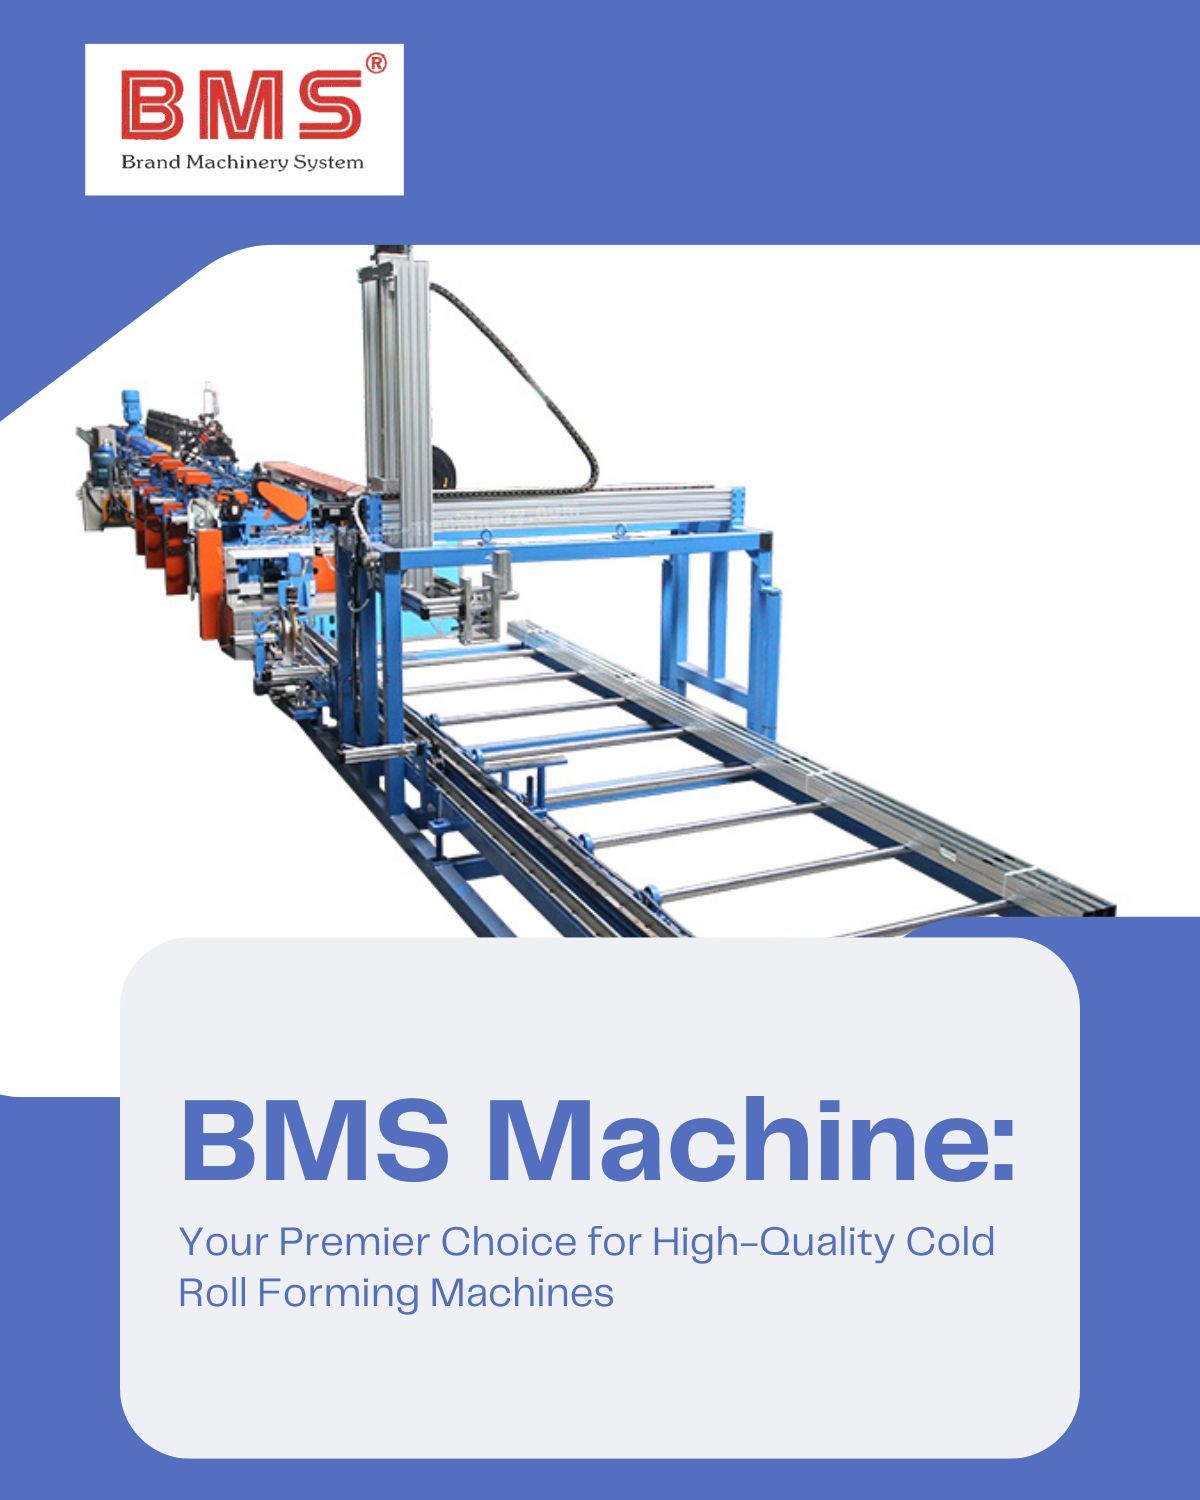 BMS Machine: Your Premier Choice for High-Quality Cold Roll Forming Machines